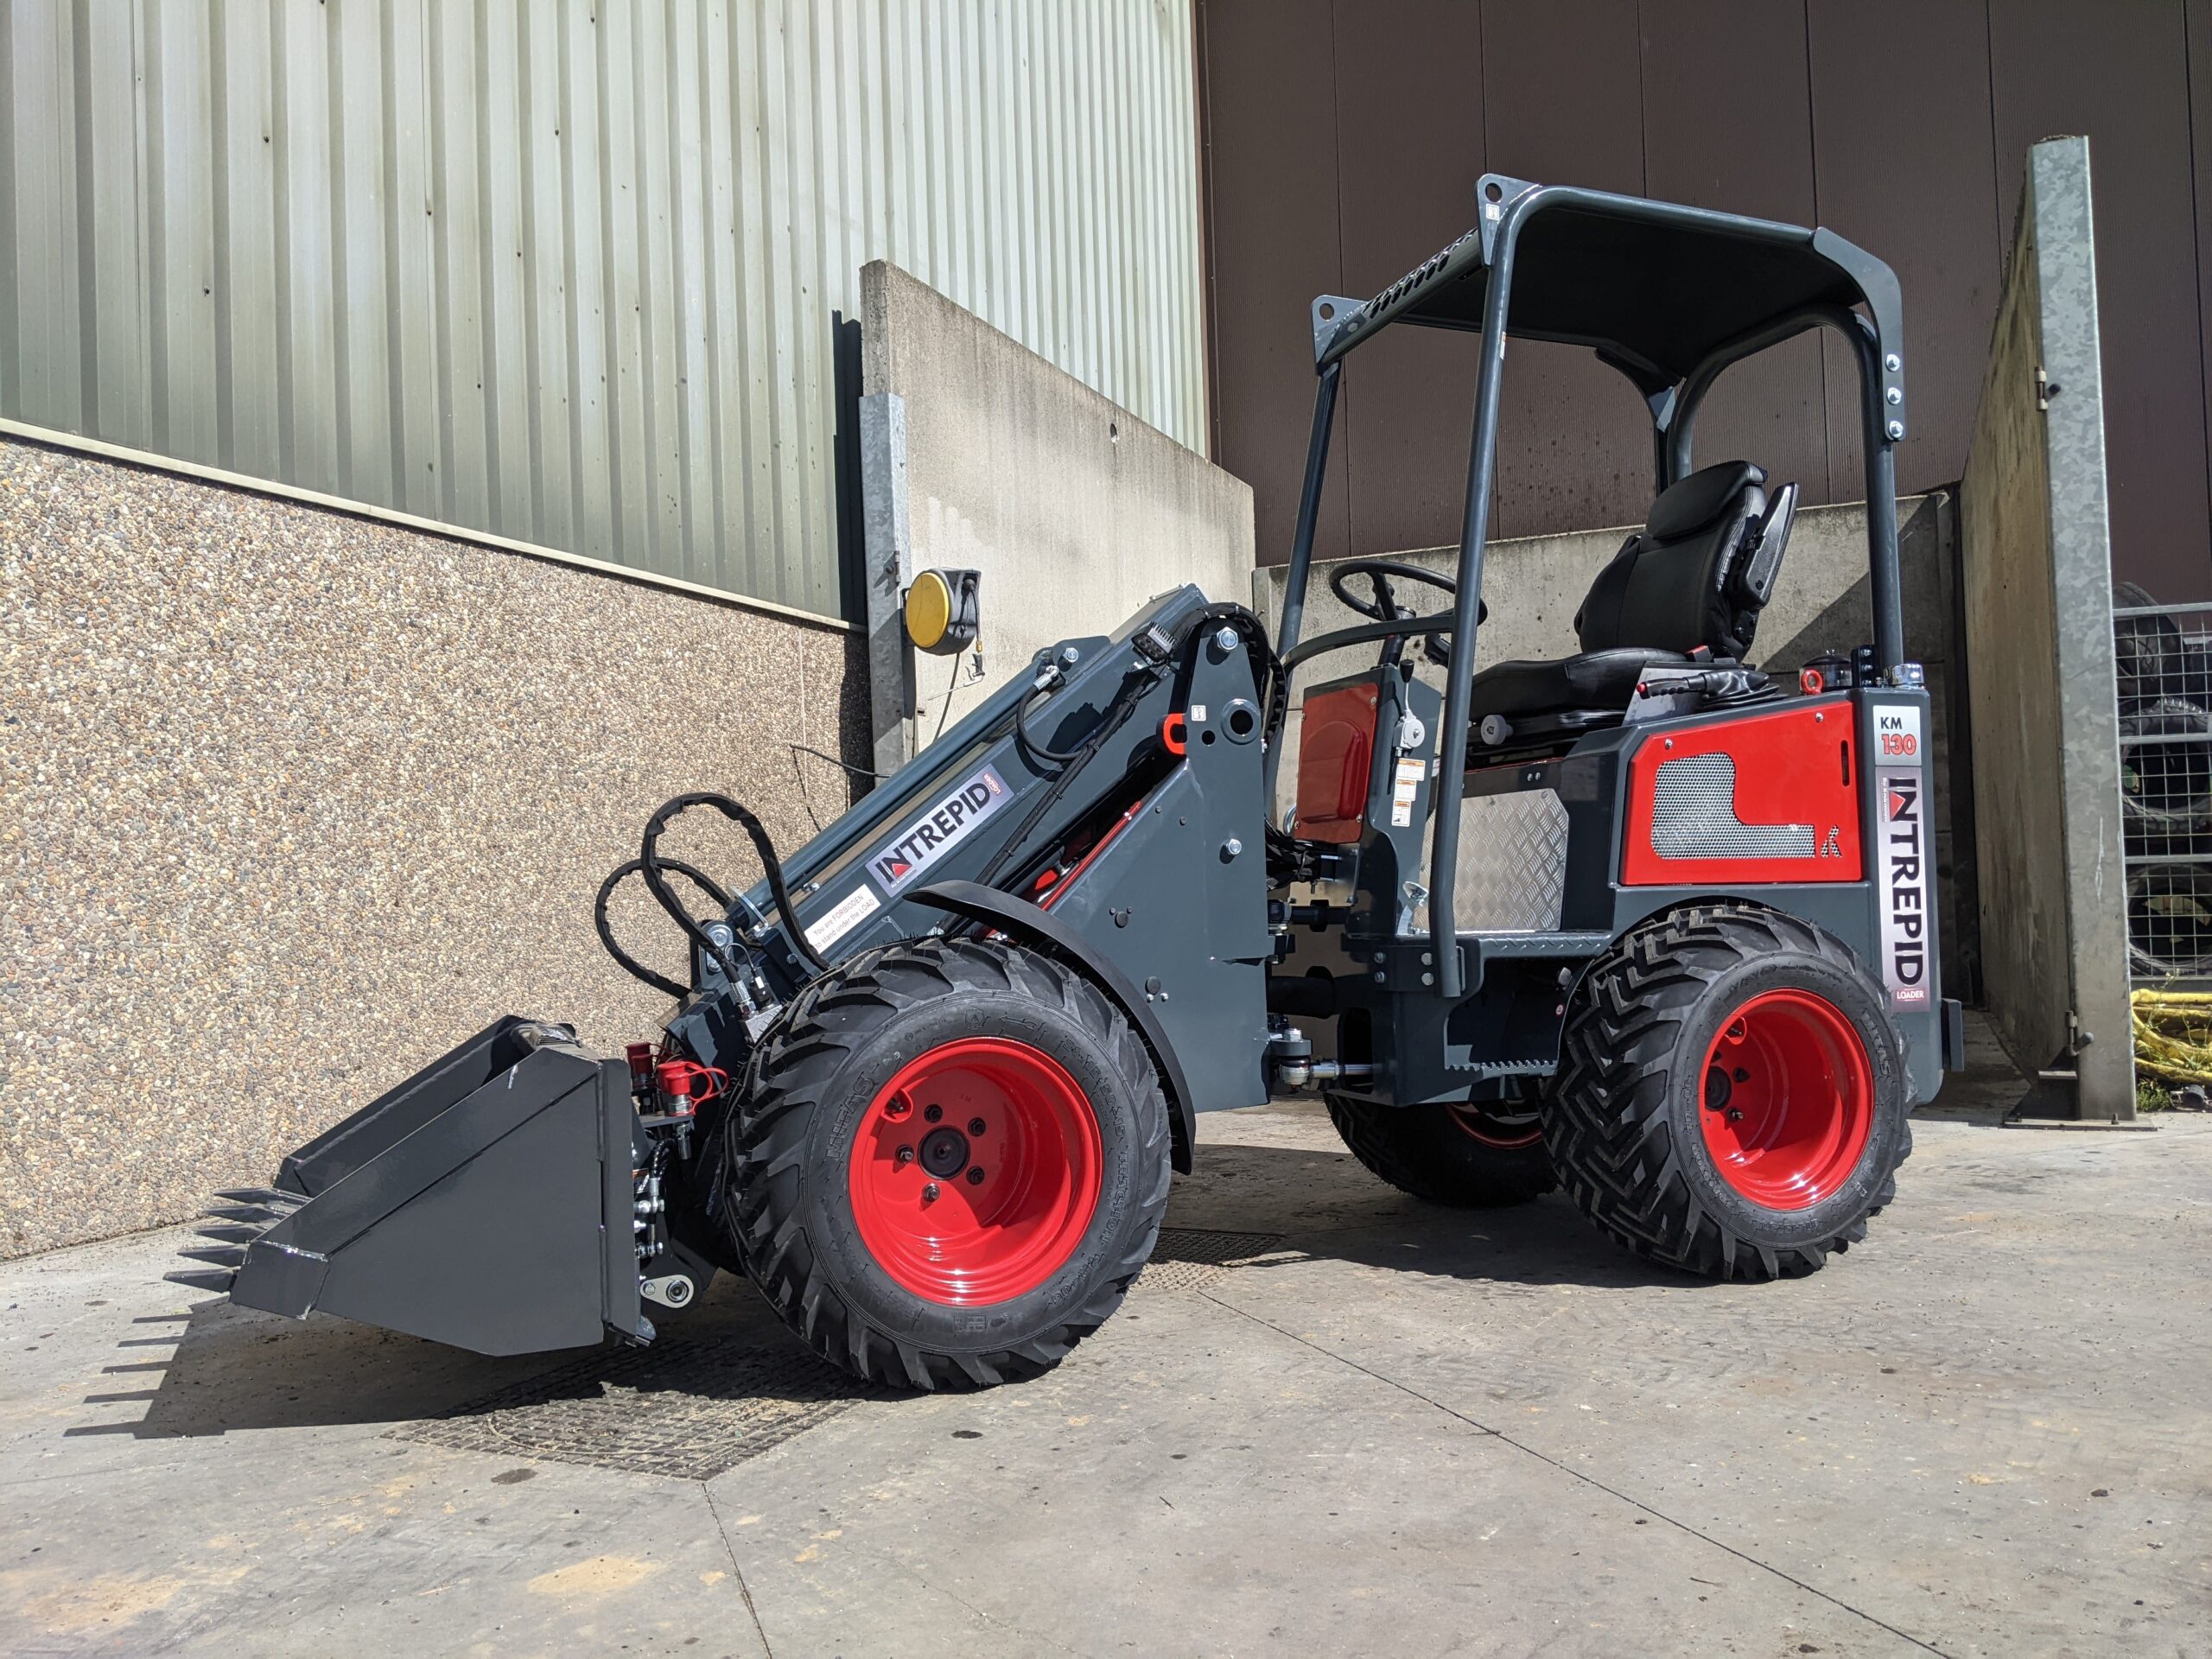 Intrepid KM130 Tele compact loader with dirt bucket